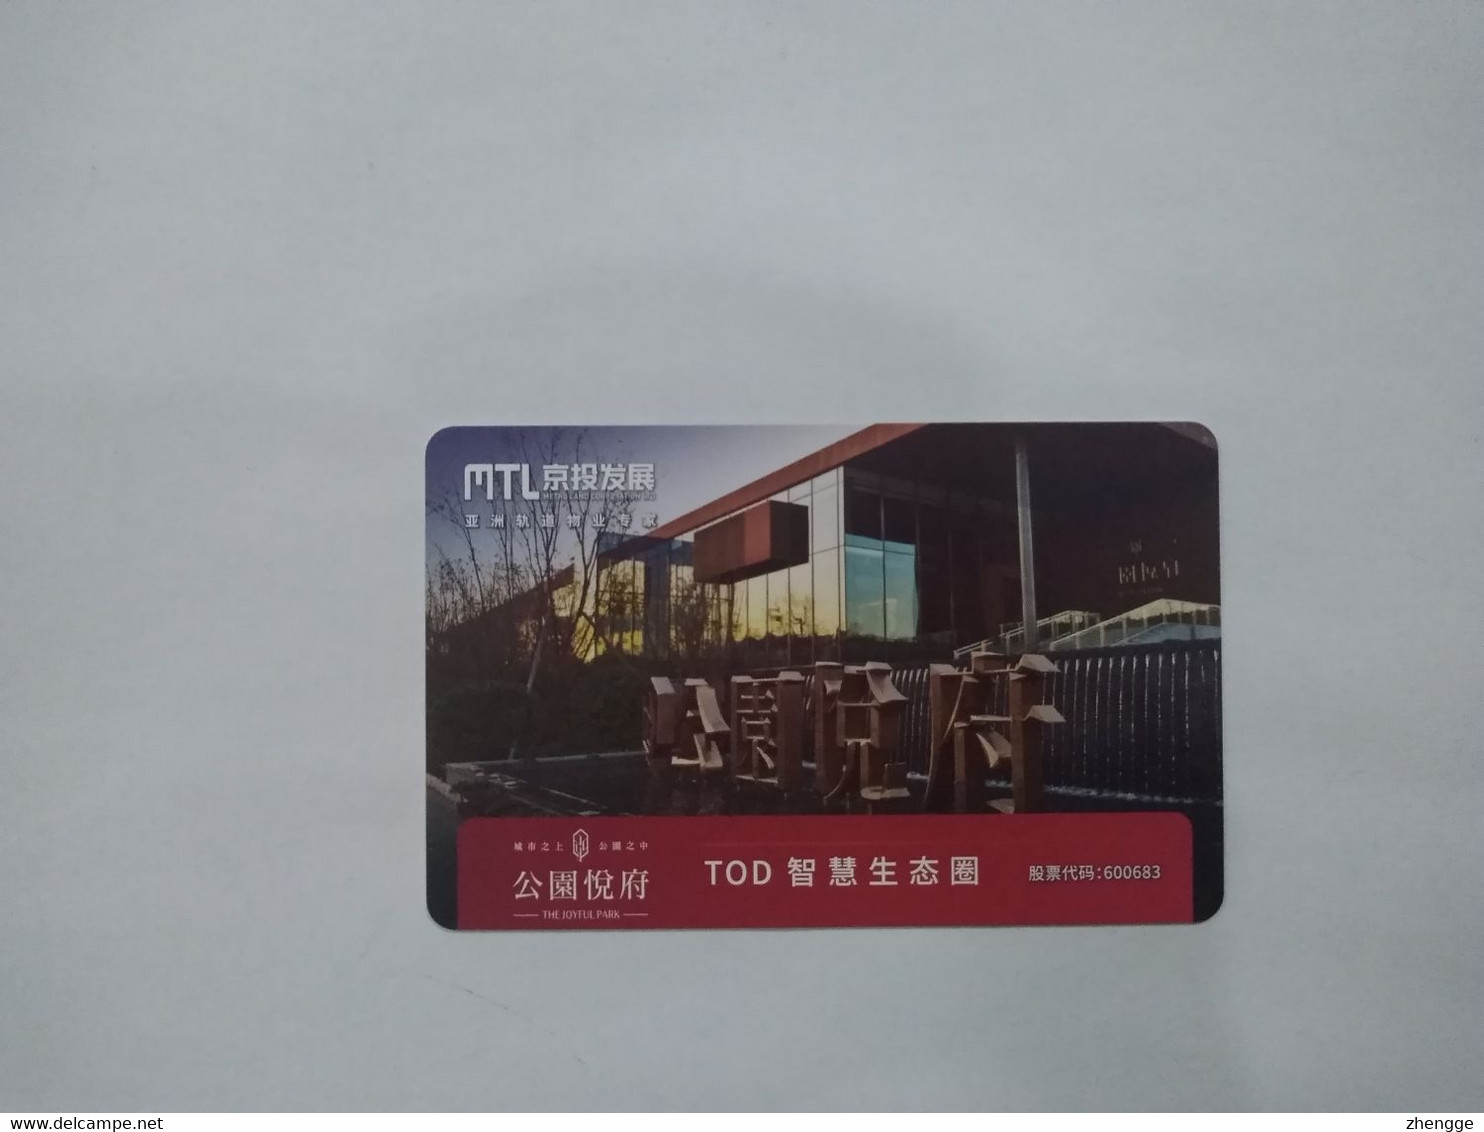 China Transport Cards,   Metro Card, Beijing City, (1pcs) - Unclassified